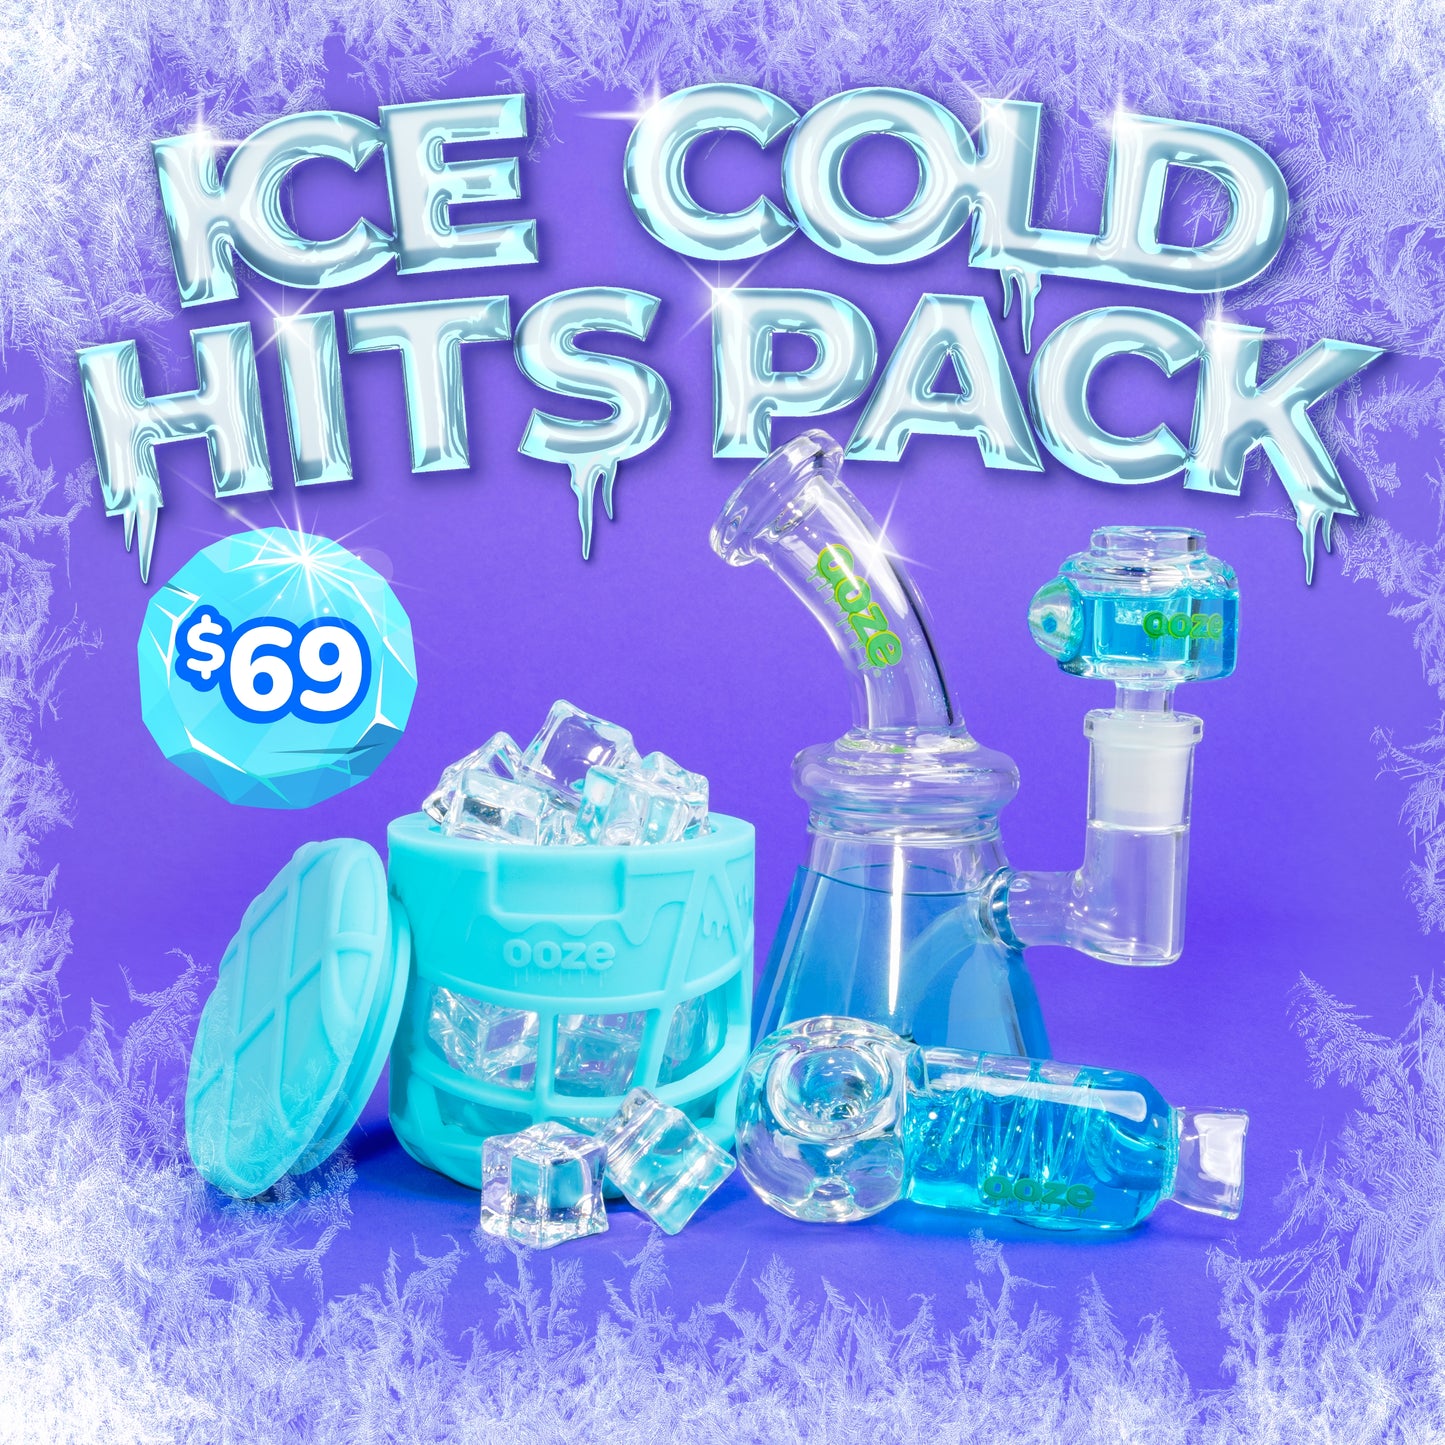 The Ice Cold Hits Pack graphic has an icy purple background and shows the aqua teal Glyco, cryo and prizm stash jar filled with ice